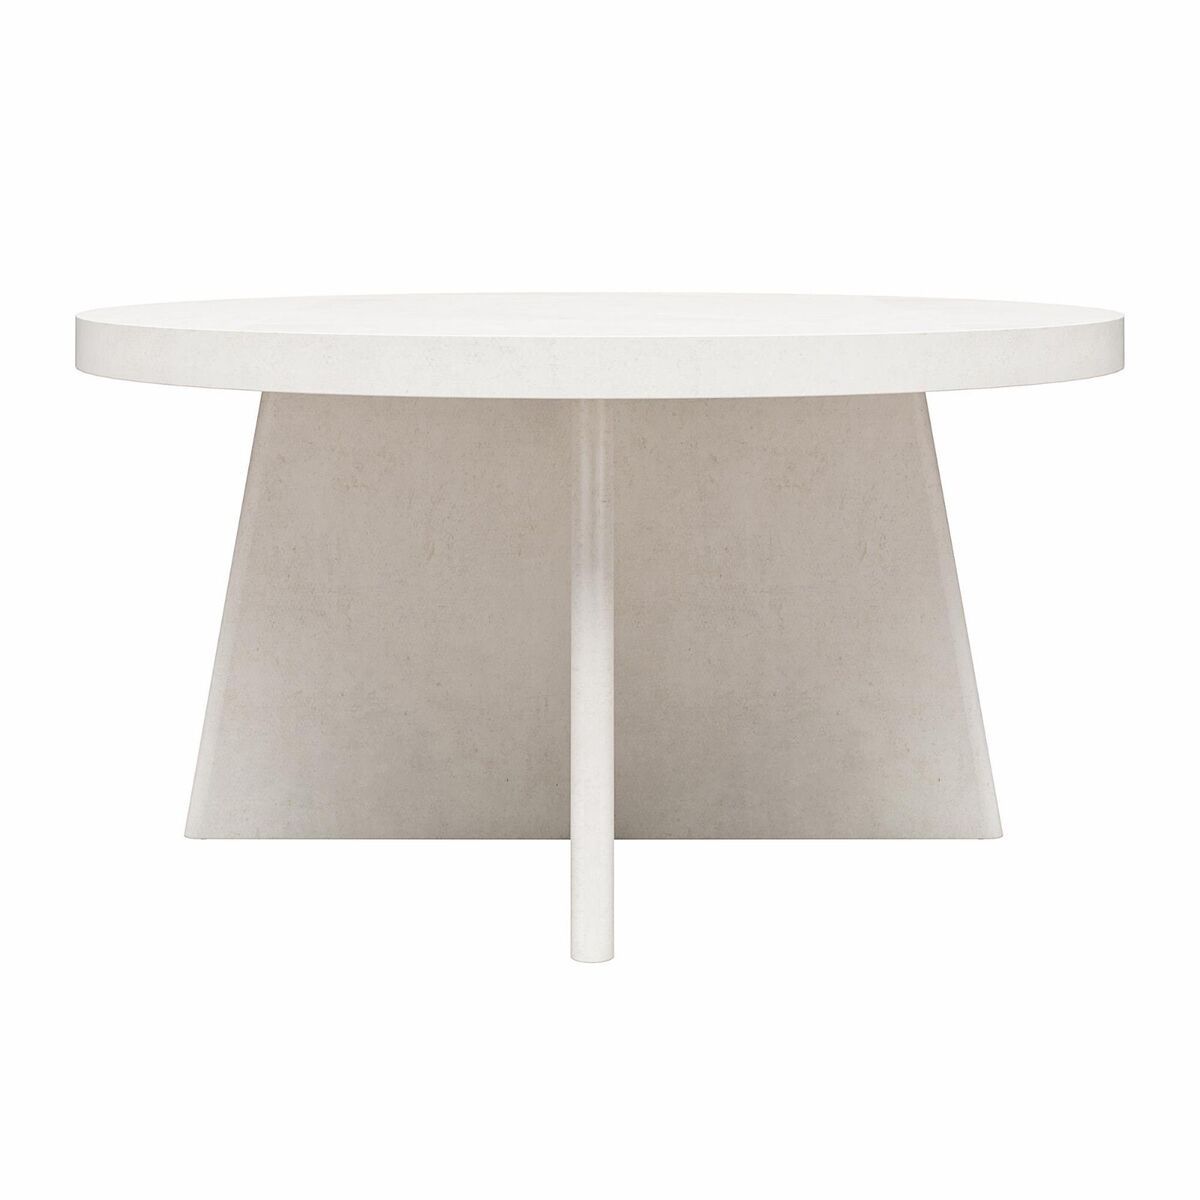 Liam Round Coffee Table, Plaster Intertwines Crisp Minimalism With Earthy  Warmth | Ebay Within Liam Round Plaster Coffee Tables (View 5 of 15)